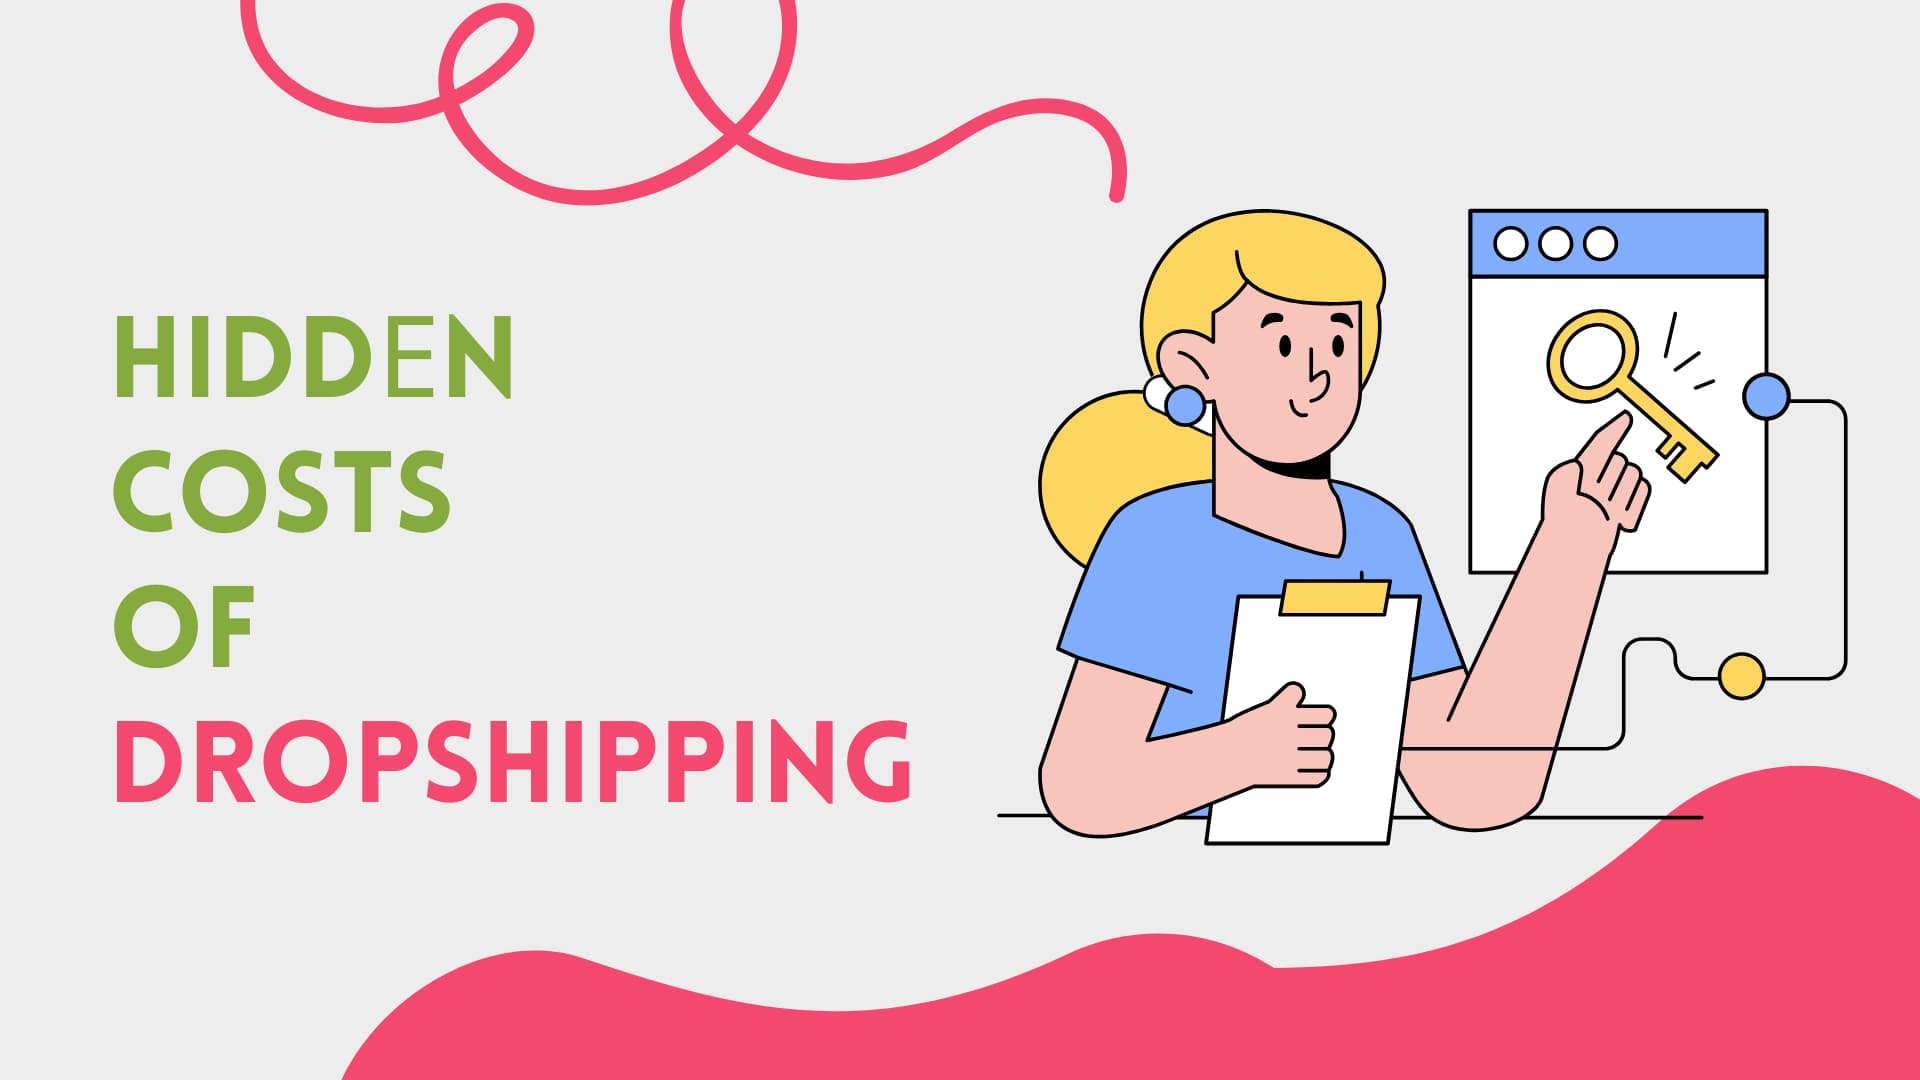 text "hidden costs of dropshipping" on a grey and red background with a cartoon blonde female character inspecting a document